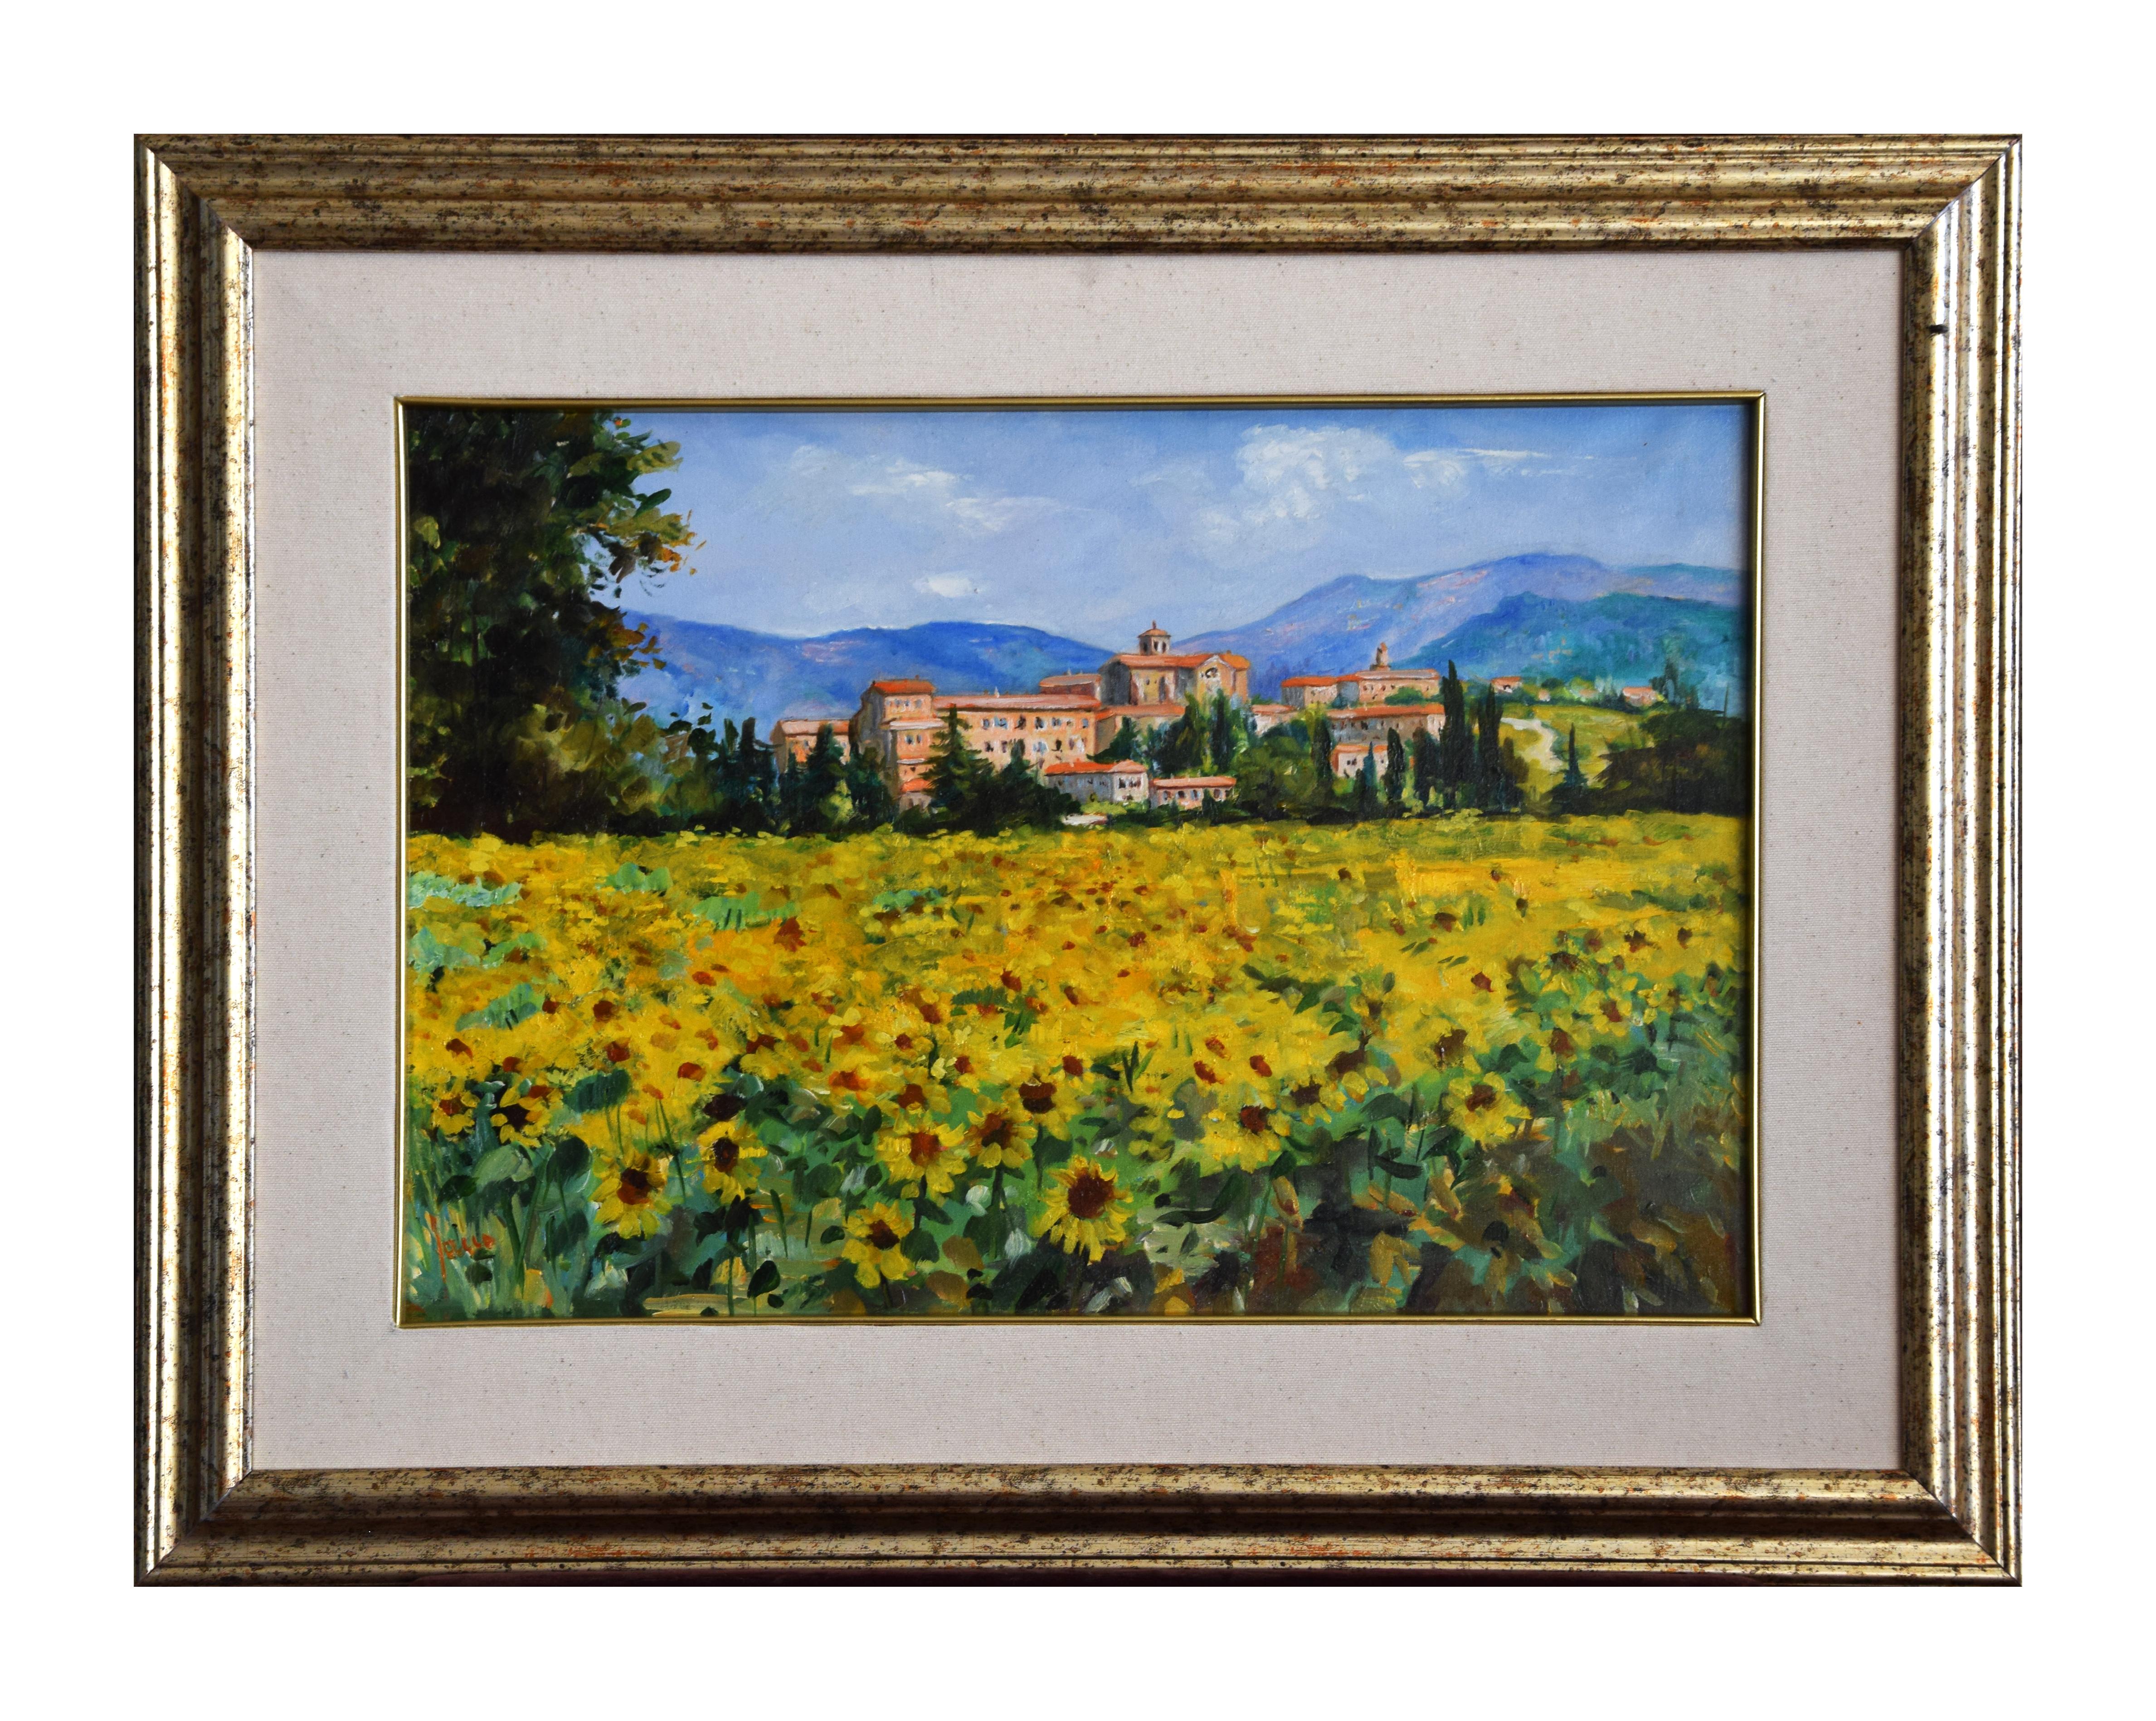 Abbey at Farfa is a beautiful oil painting realized by the Italian contemporary artist Luciano Sacco.

Including a frame (53 x 68 cm). Hand-signed by the artist on the lower left.

Reference: Luciano Sacco, I colori della natura, Casa D'Arte